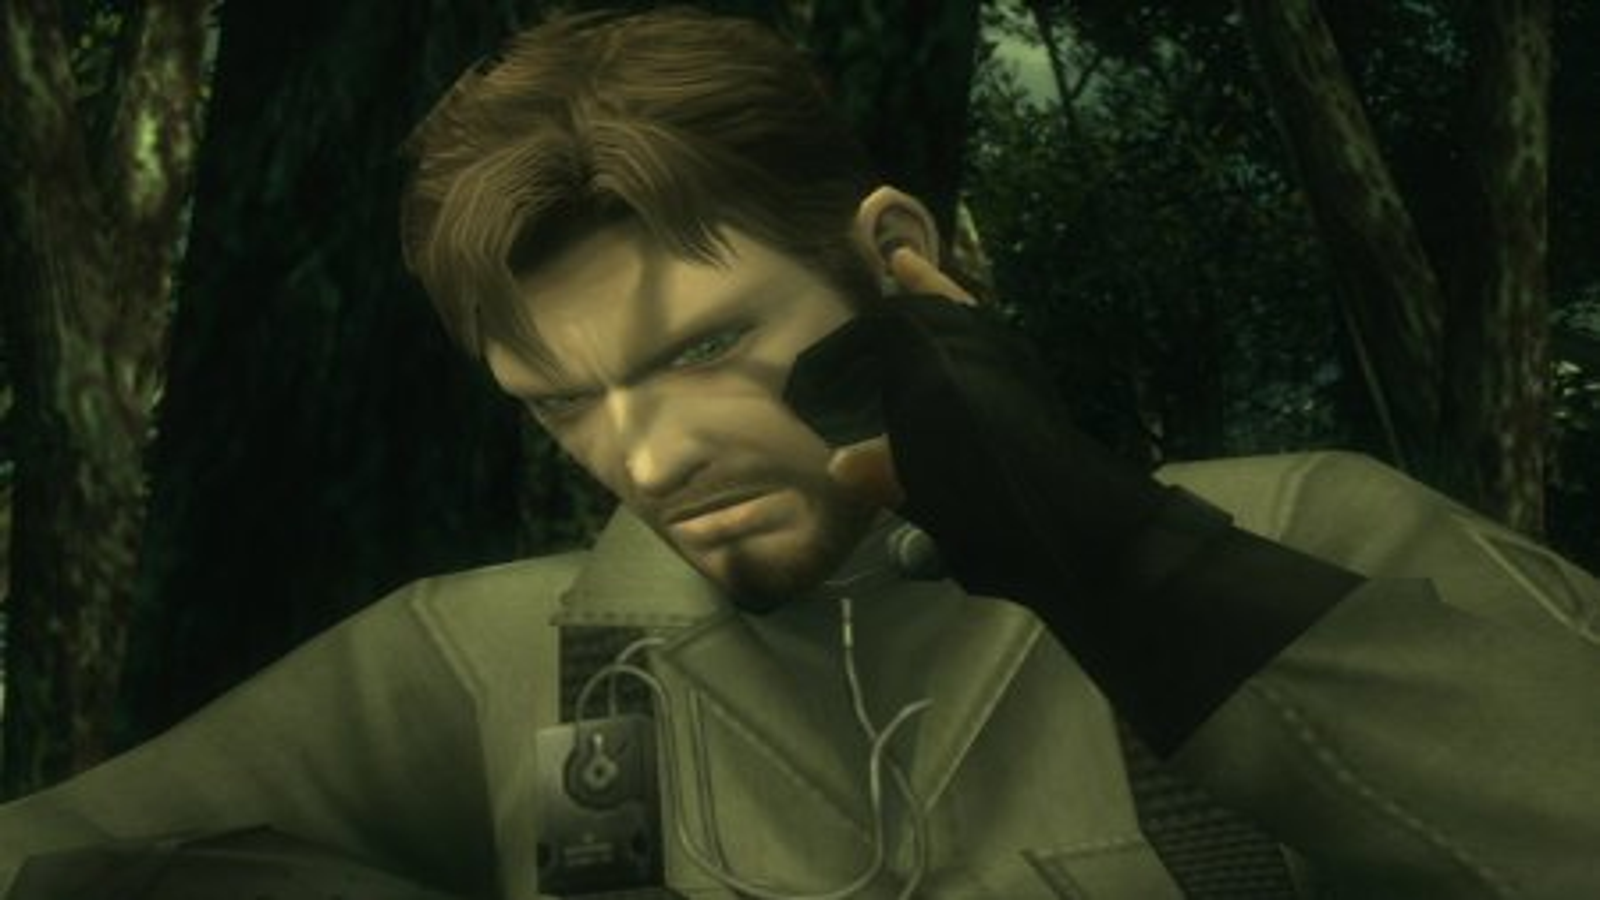 Metal Gear Solid 3 Snake Eater Hd Xbox 360